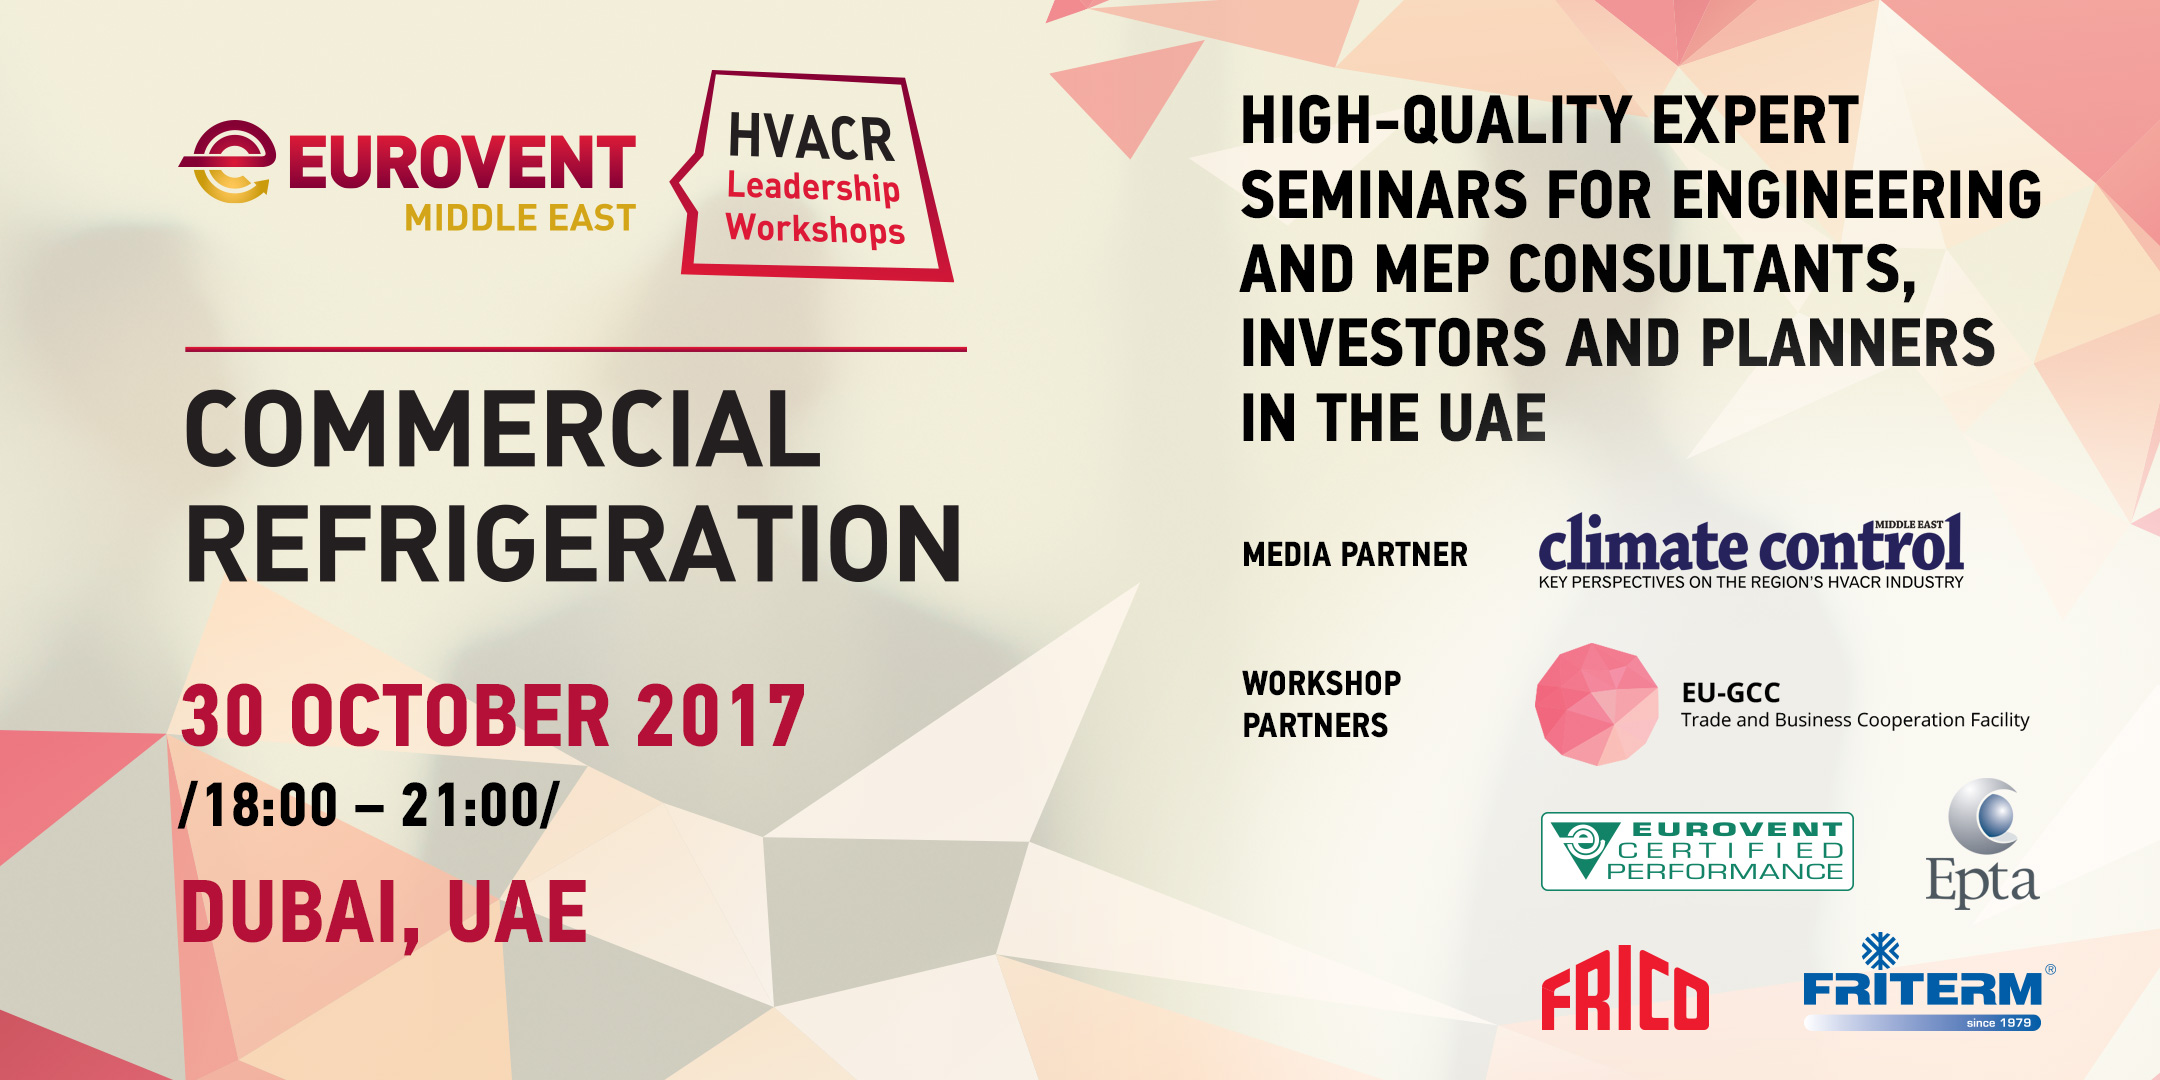 2017 - 'HVACR Leadership Workshops by Eurovent Middle East' - Commercial Refrigerationą